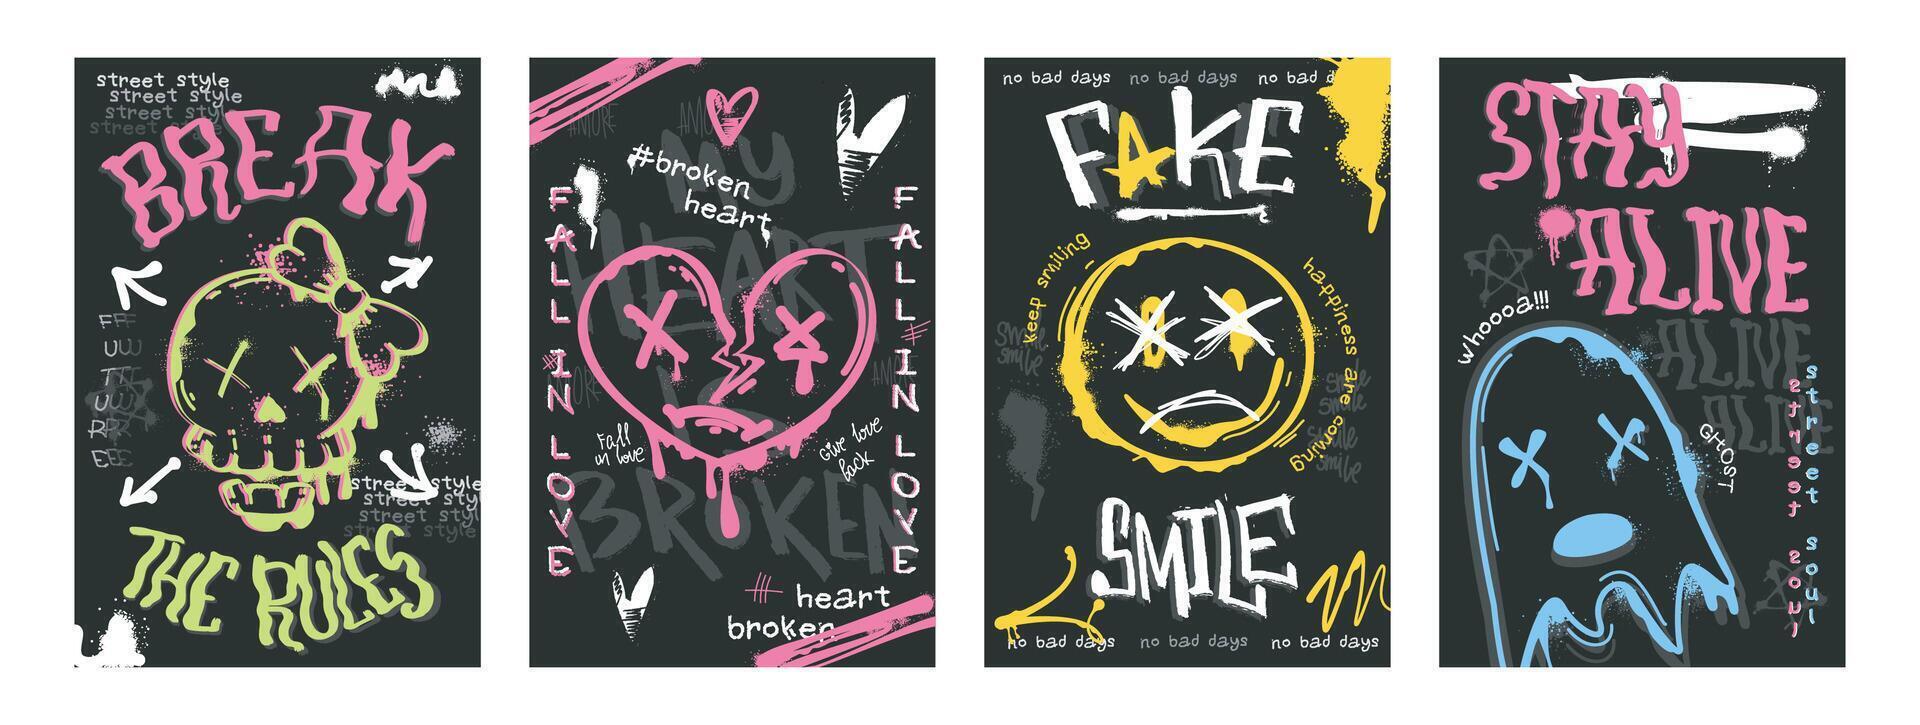 Set of graffiti poster with spray paint skull, heart sign, ghost and smiling face emoji. Street art covers of splashes, ink drip splatter, faces in hand drawing style on black background. Urban design vector